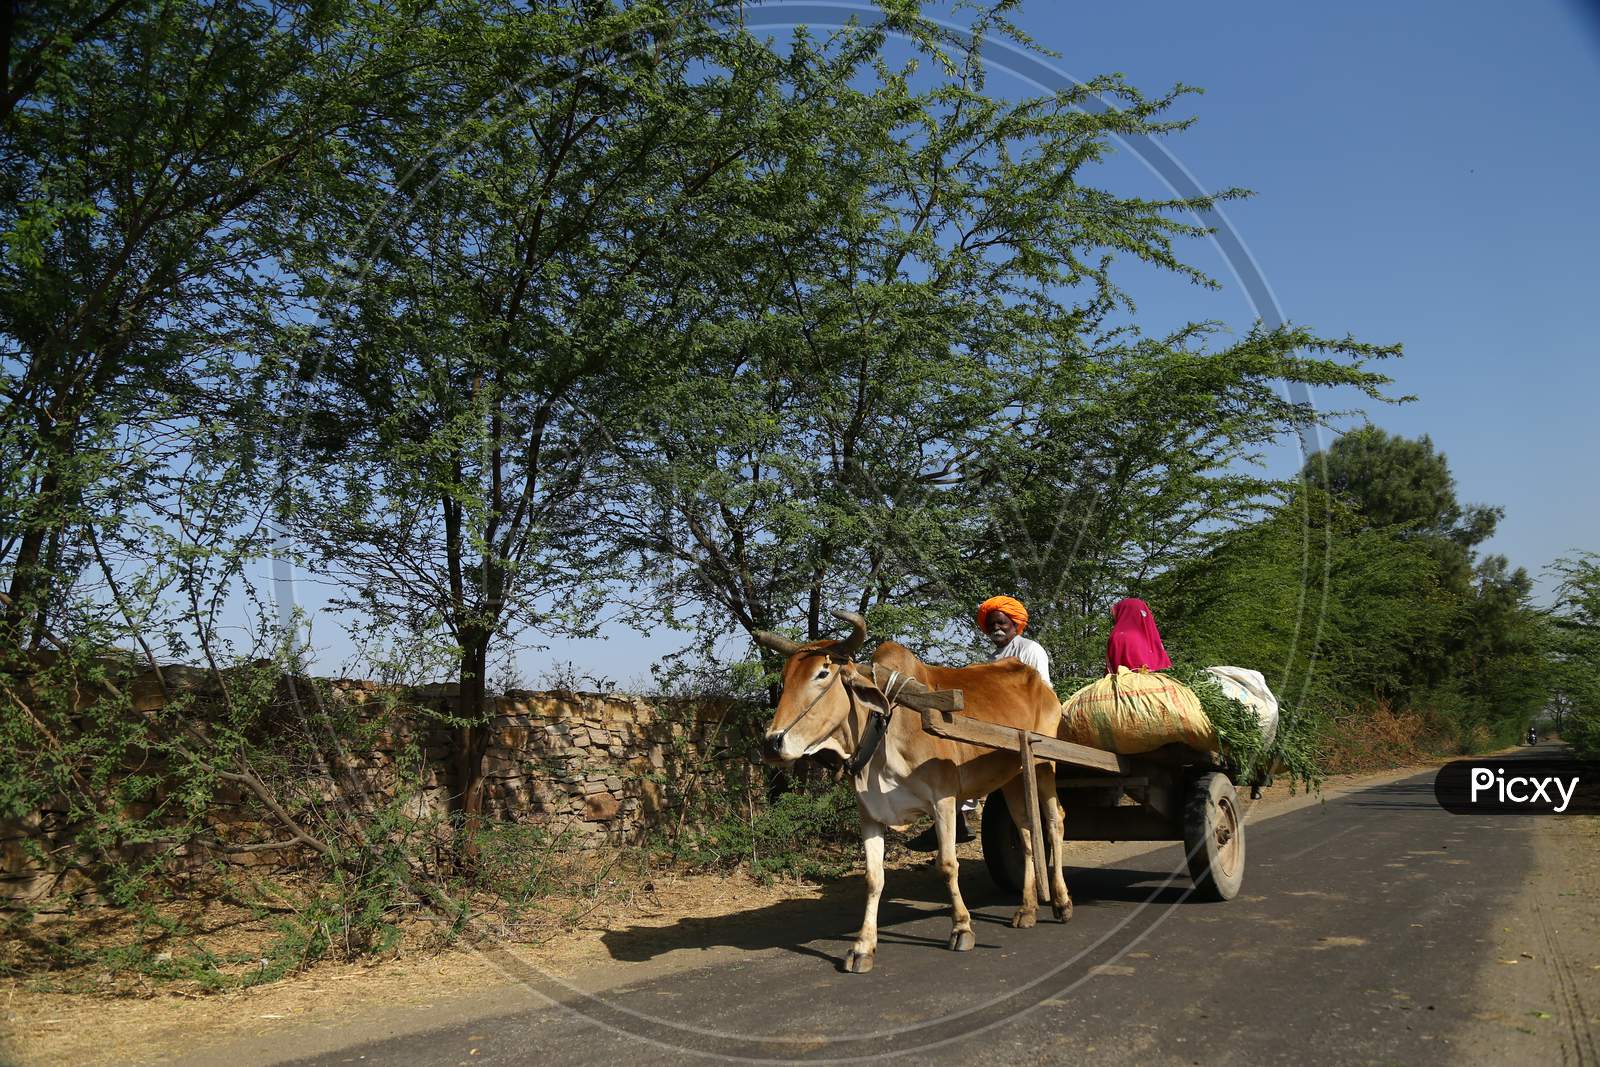 Indian Farmer returns from agriculture fields with produce carried on a bullock cart on the outskirts of Ajmer, Rajasthan, India .